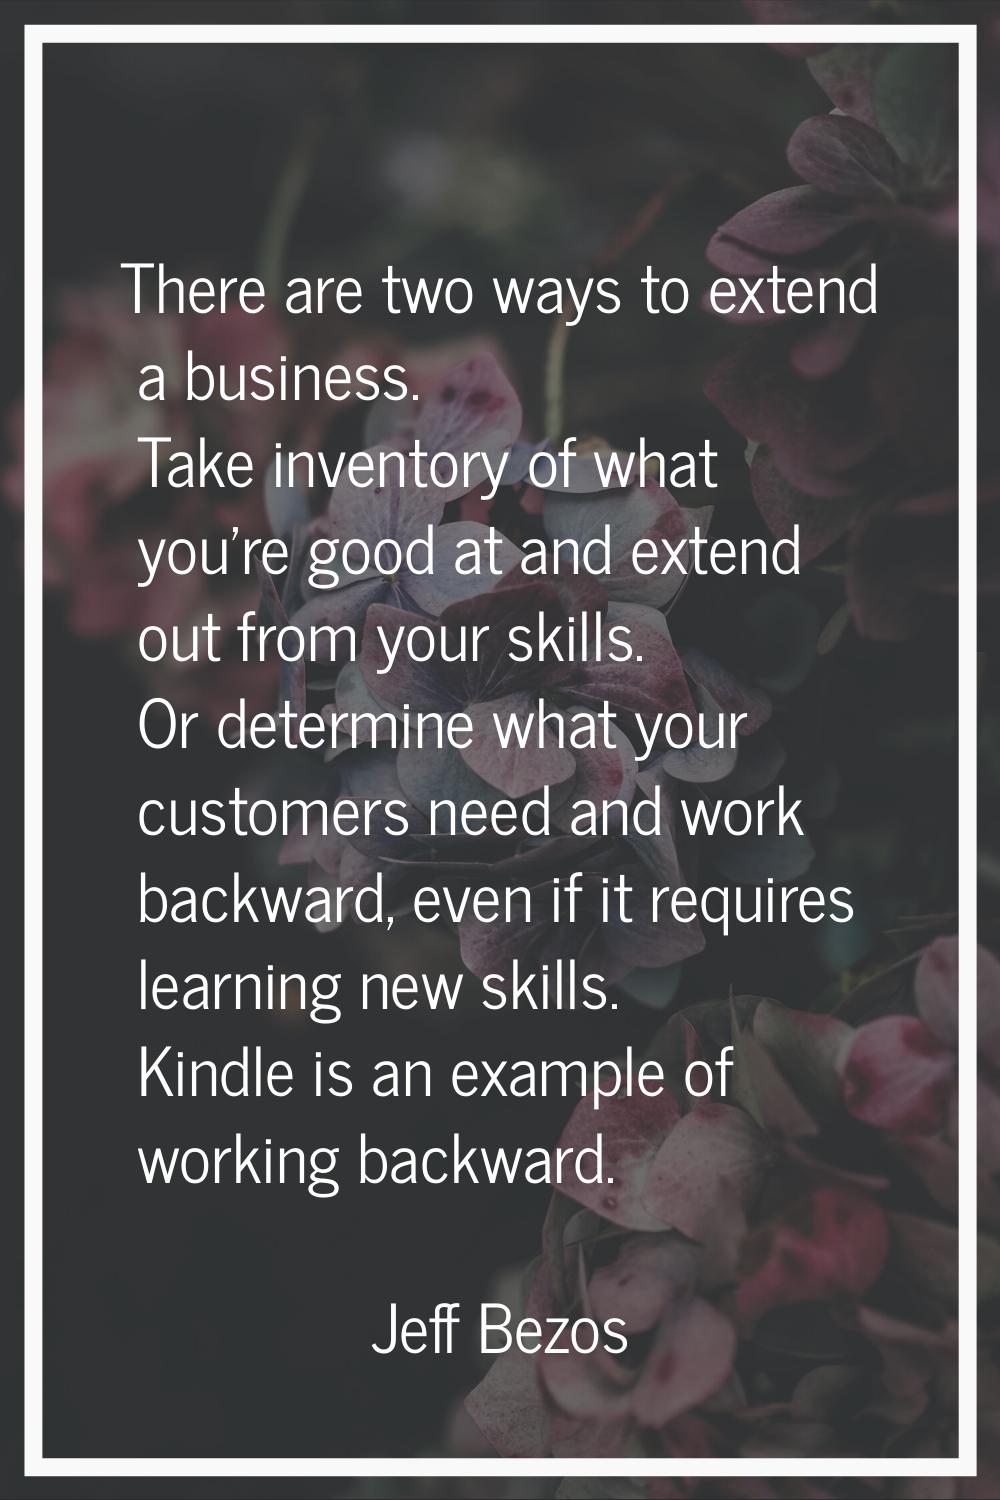 There are two ways to extend a business. Take inventory of what you're good at and extend out from 